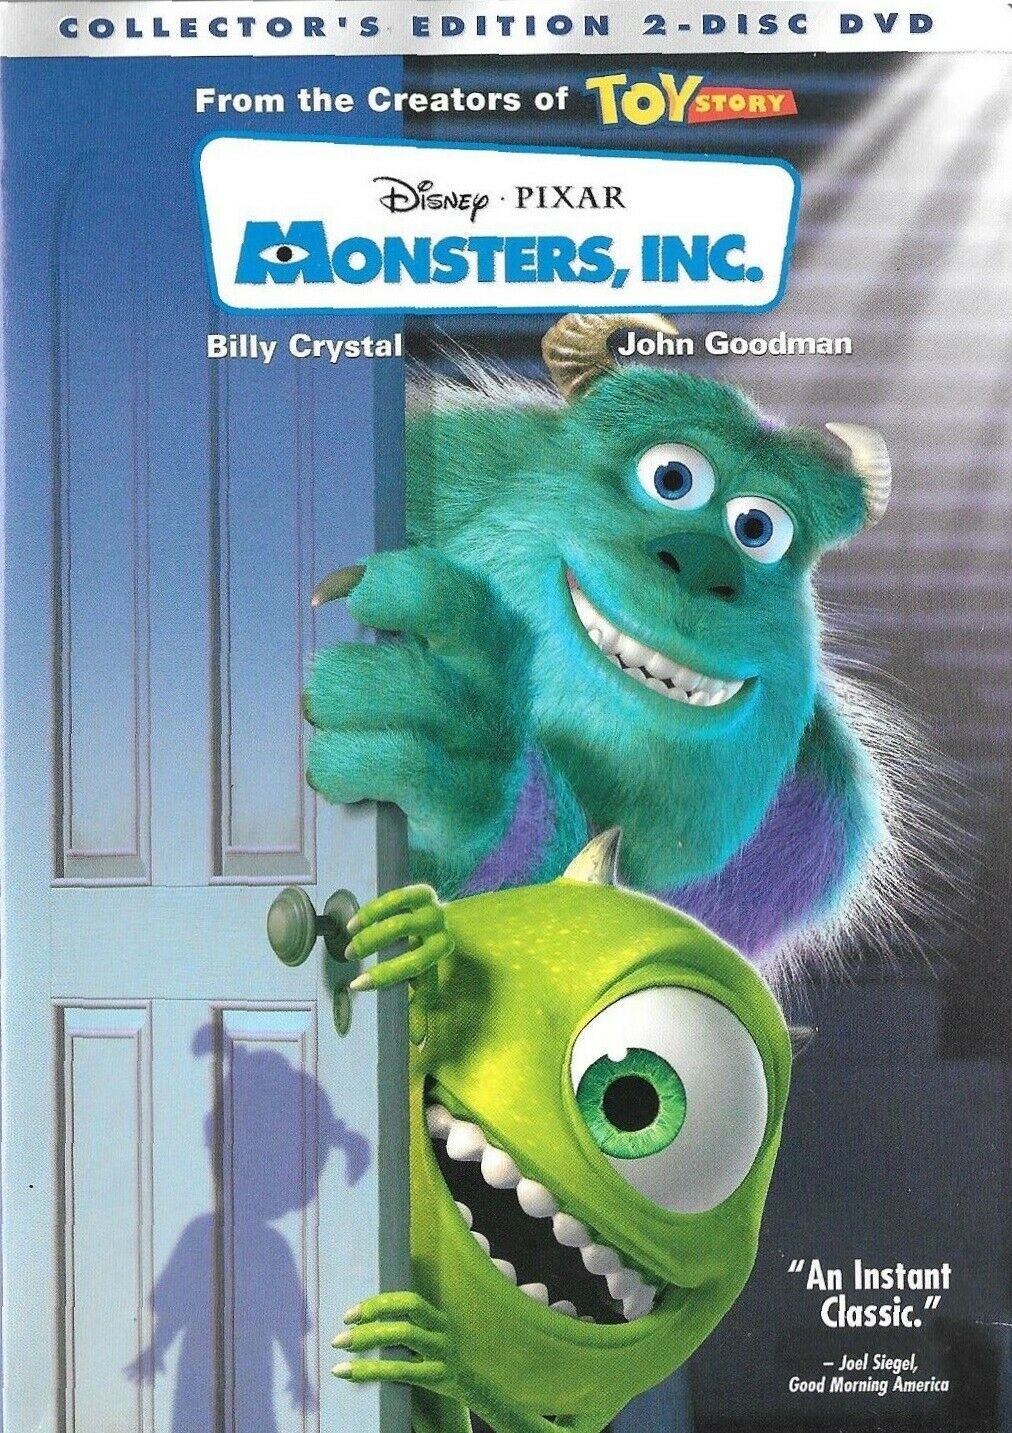 Monsters Inc.- Two Disc Collector's Edition (dvd)(2002)- Billy Crystal